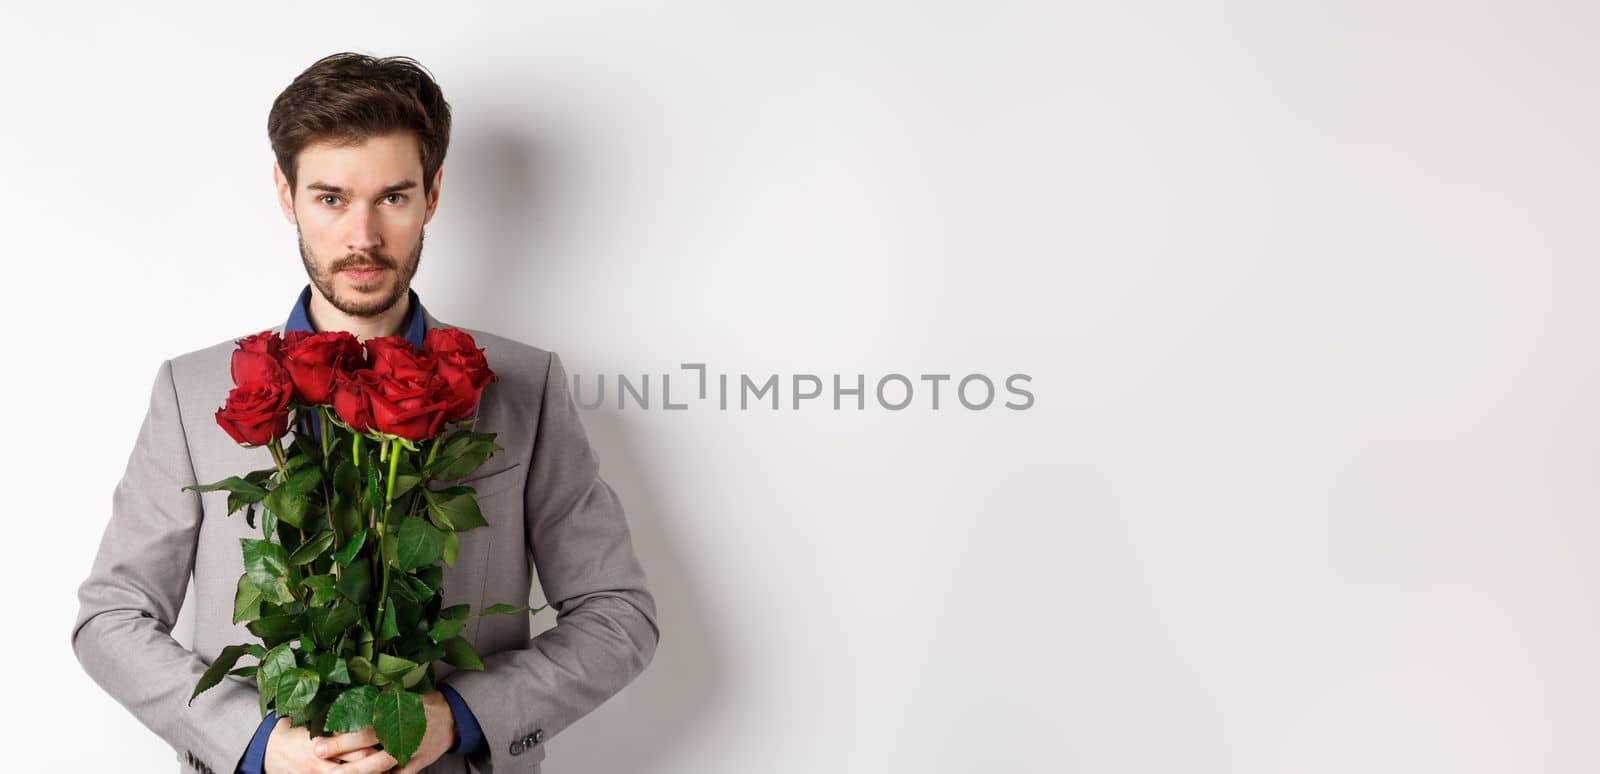 Valentines day and love concept. Confident and handsome man in suit holding bouquet of roses, looking at camera, standing over white background.